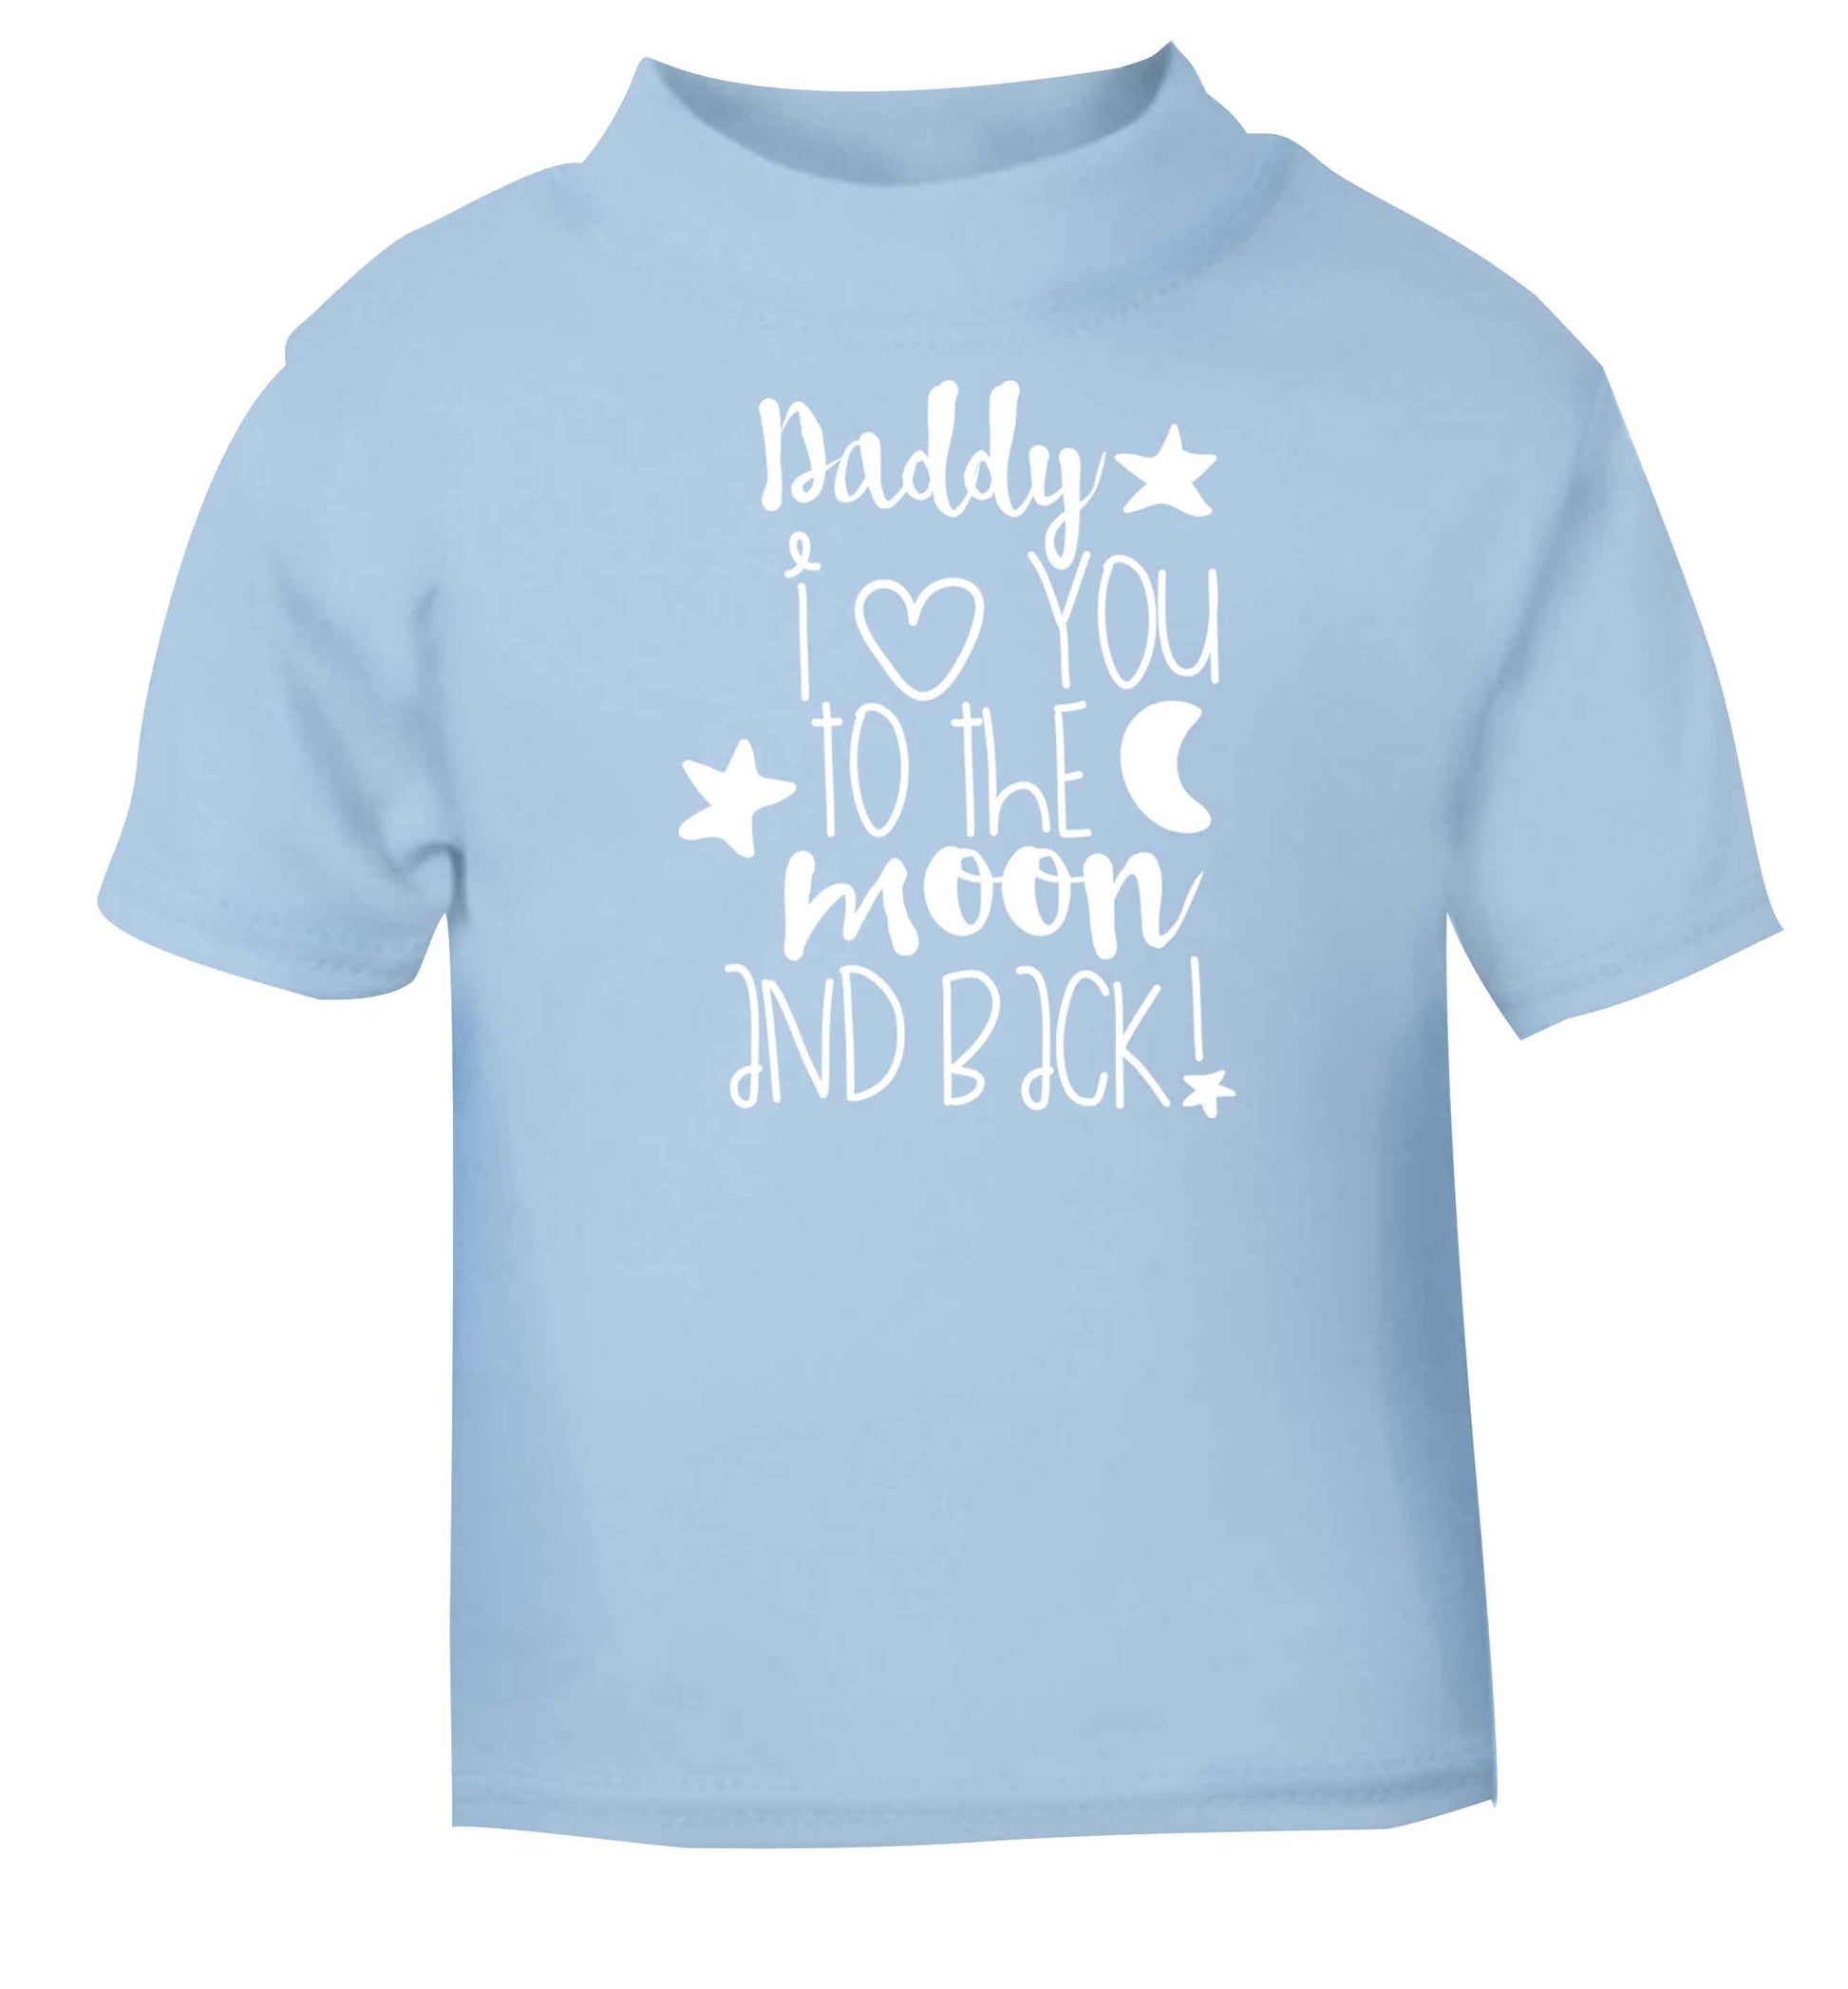 Daddy I love you to the moon and back light blue baby toddler Tshirt 2 Years